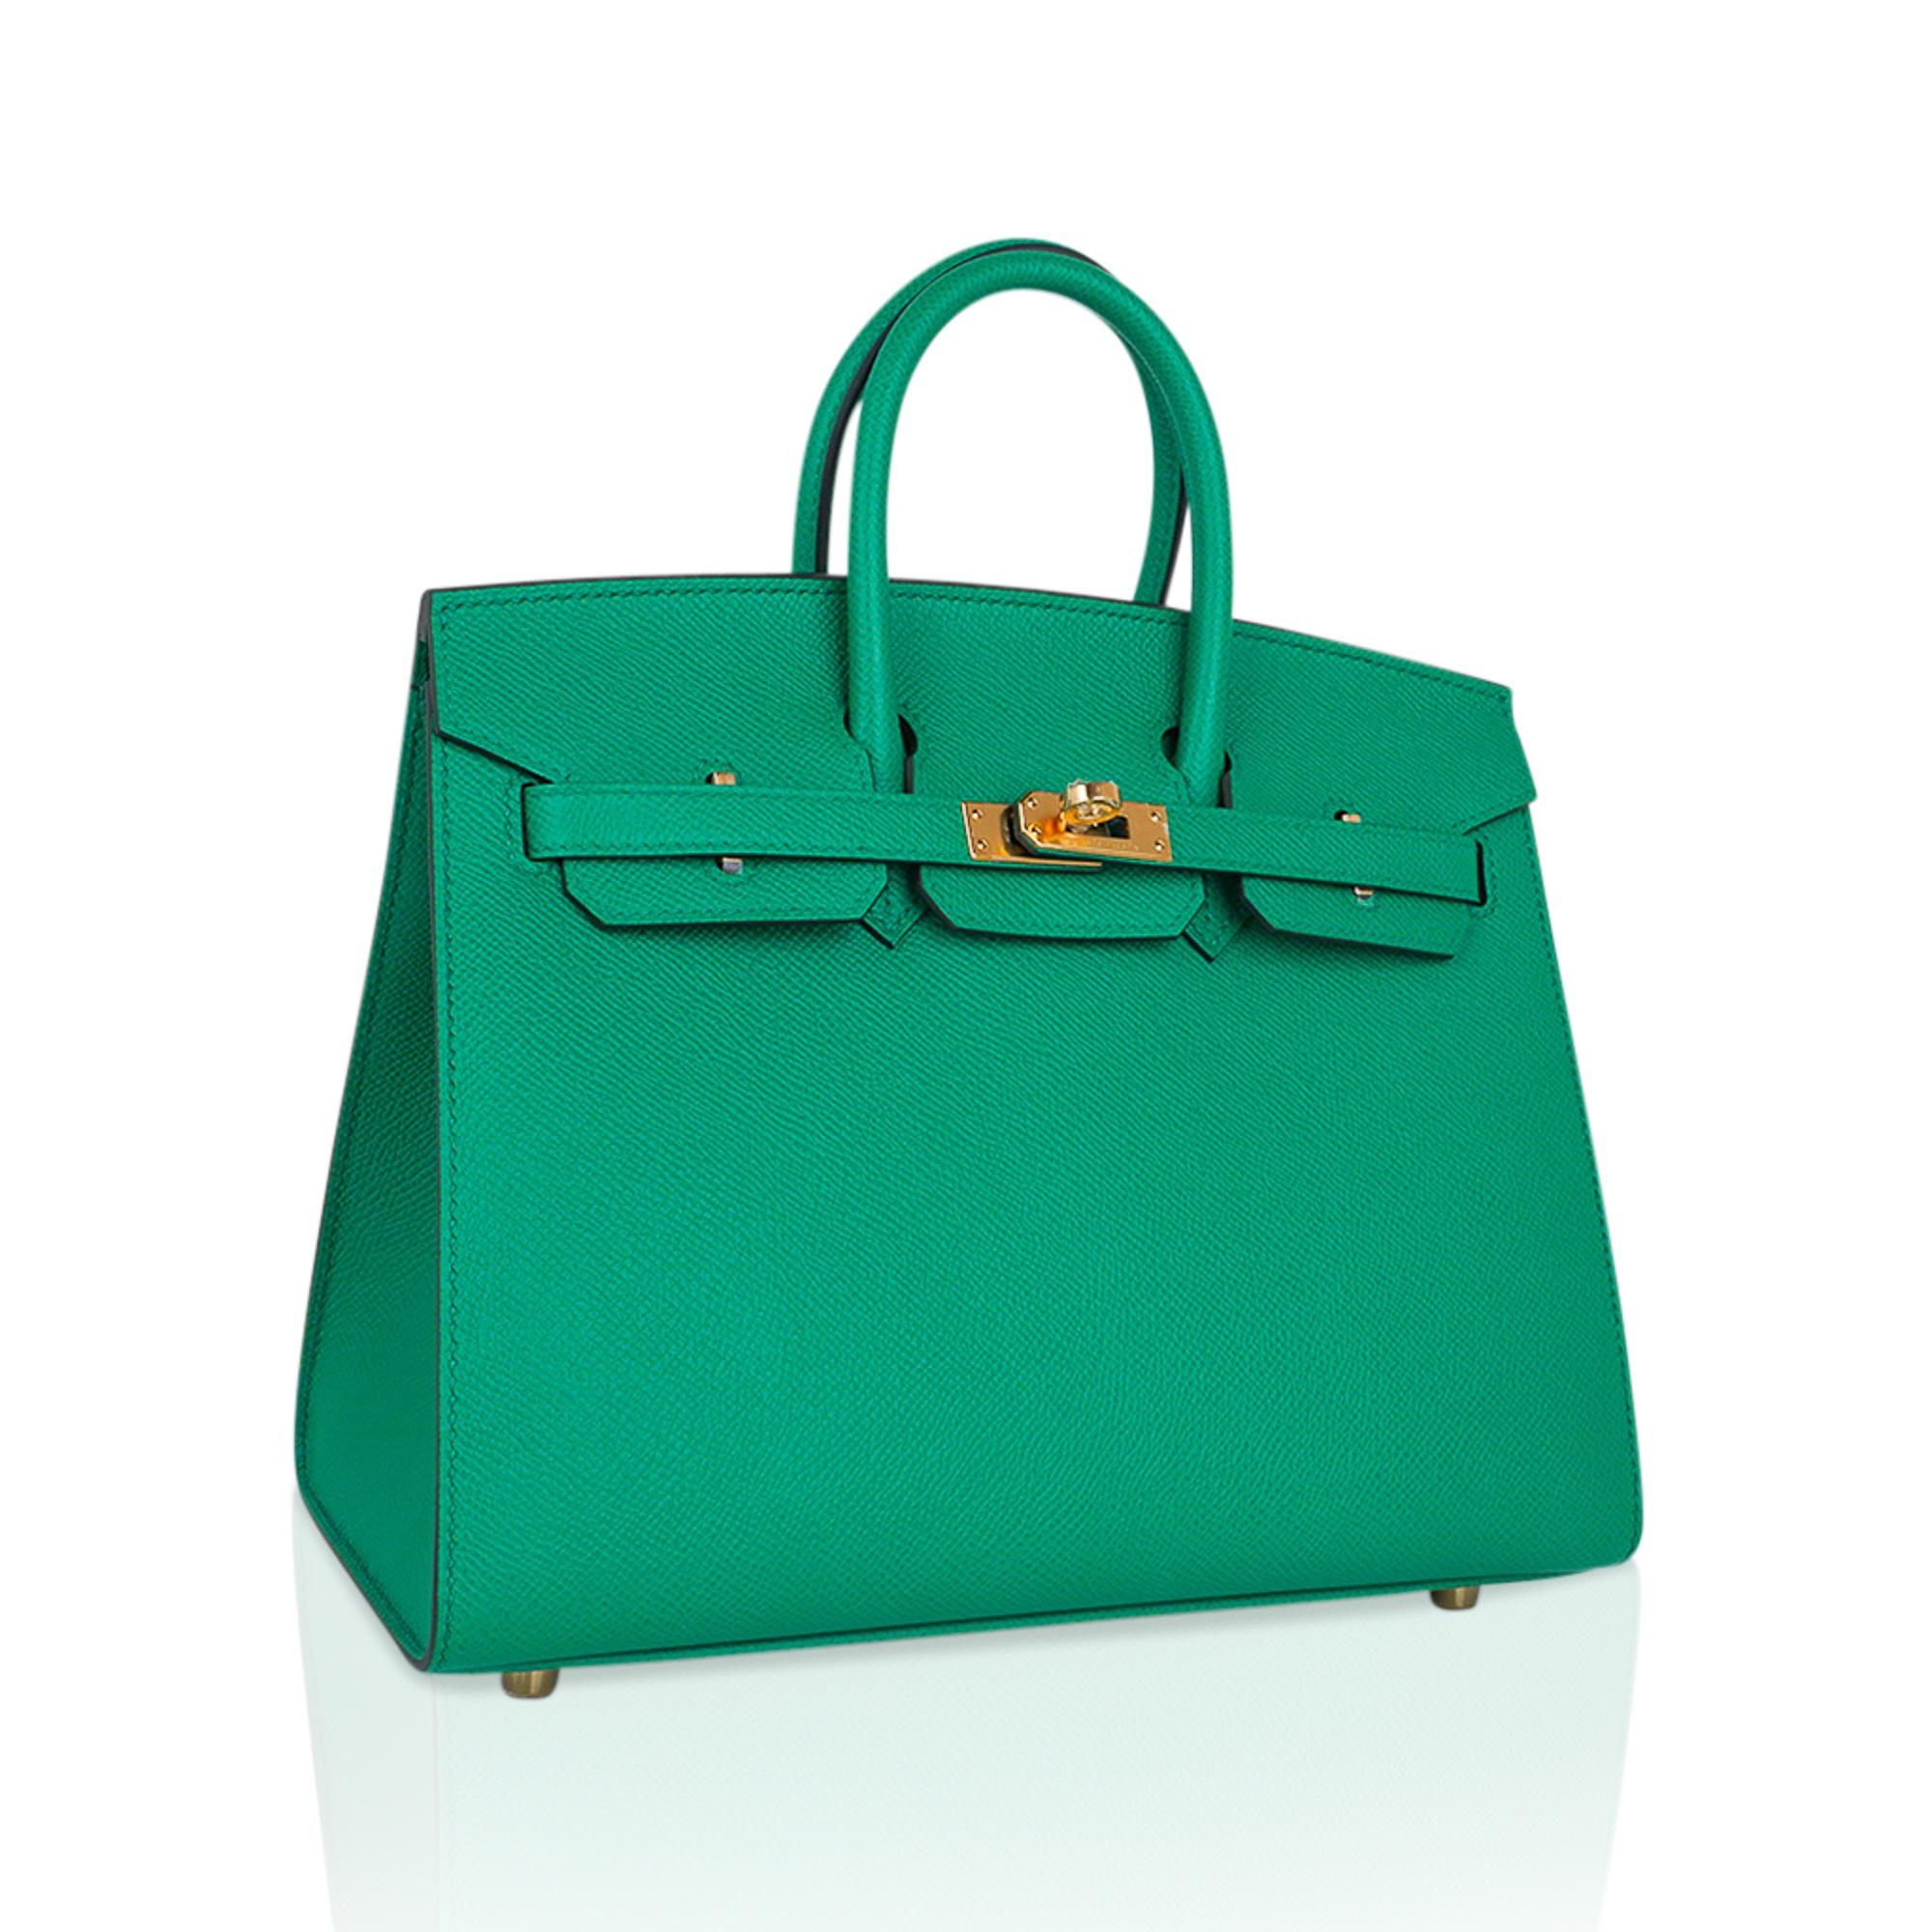 Mightychic offers an Hermes Birkin Sellier 25 bag featured in coveted Vert Jade.
Lush with Gold hardware.
This exquisite bag is modern and minimalist.
A sleek pared down version that exudes chic sophistication.
Epsom leather and the signature